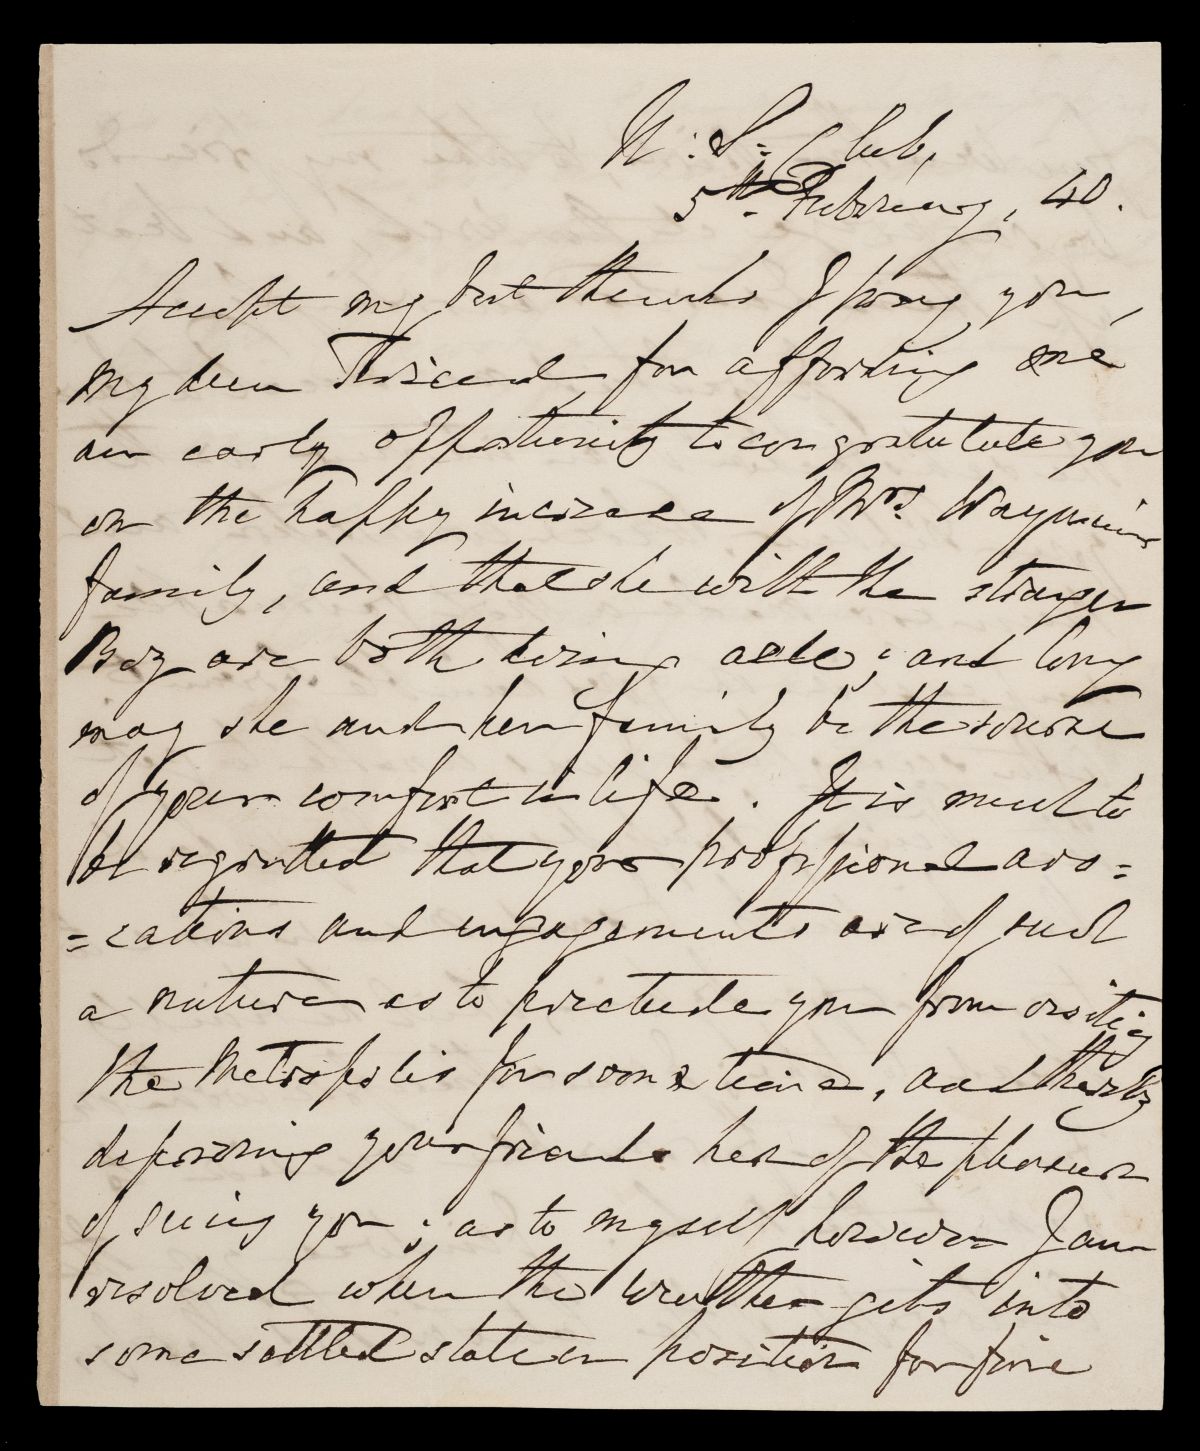 * Beatty (Sir William, 1773-1842). Autograph letter to Page Nicol Scott, 1840